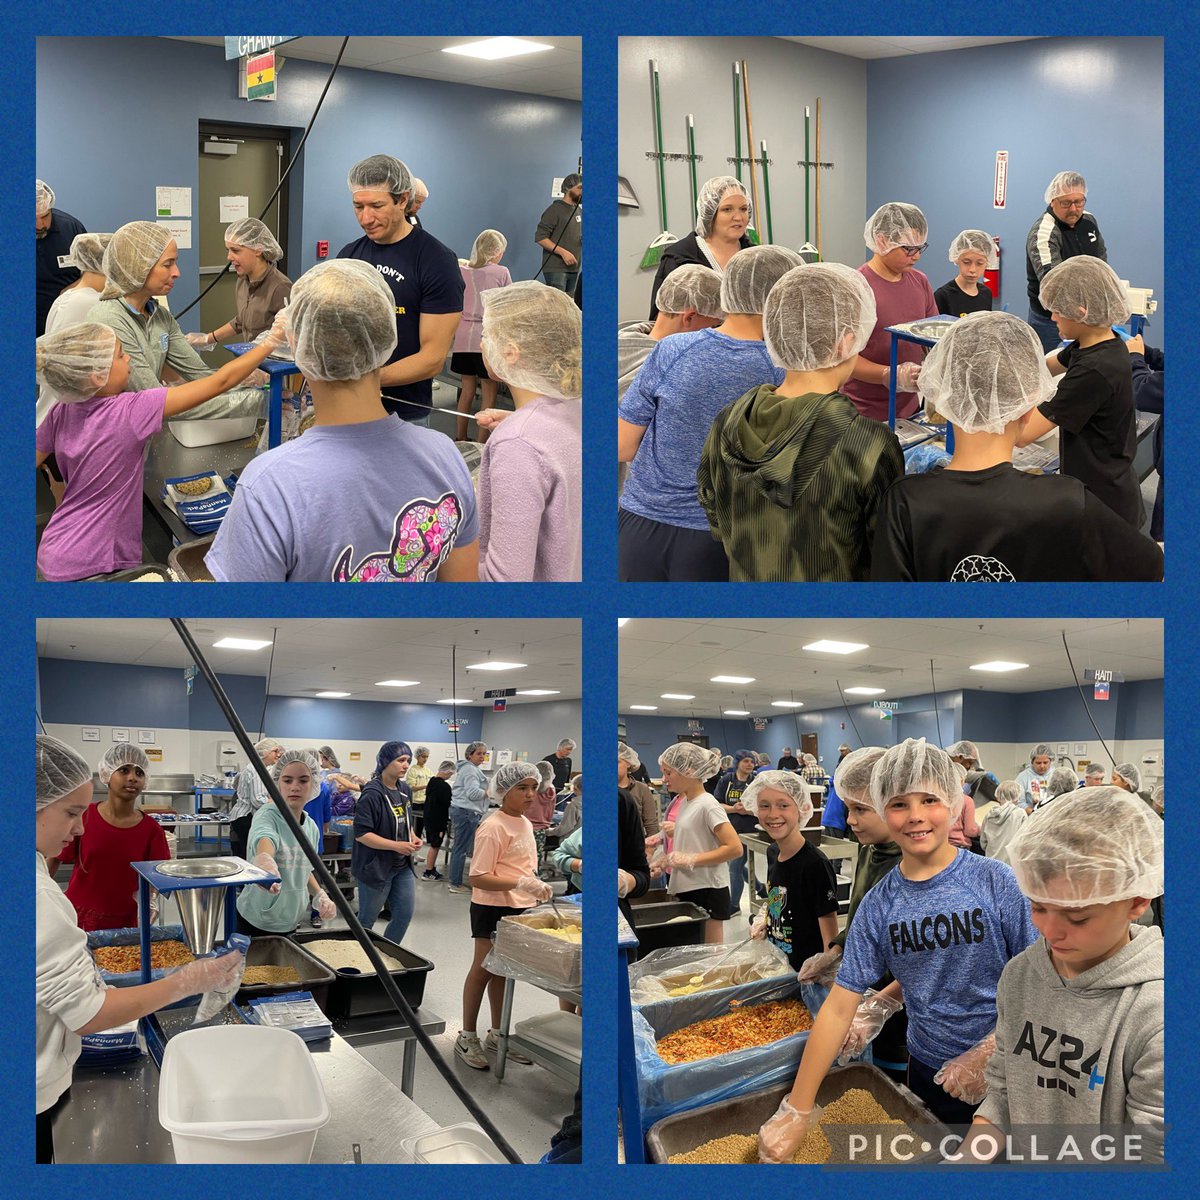 These fifth graders did a wonderful job working hard and showing kindness at @fmsc_org! We couldn’t have done it without our amazing parent volunteers! Thank you to the @DGFairmountPTA for sponsoring this field trip! 

“It just feels so good to help people!” -fifth grader ❤️